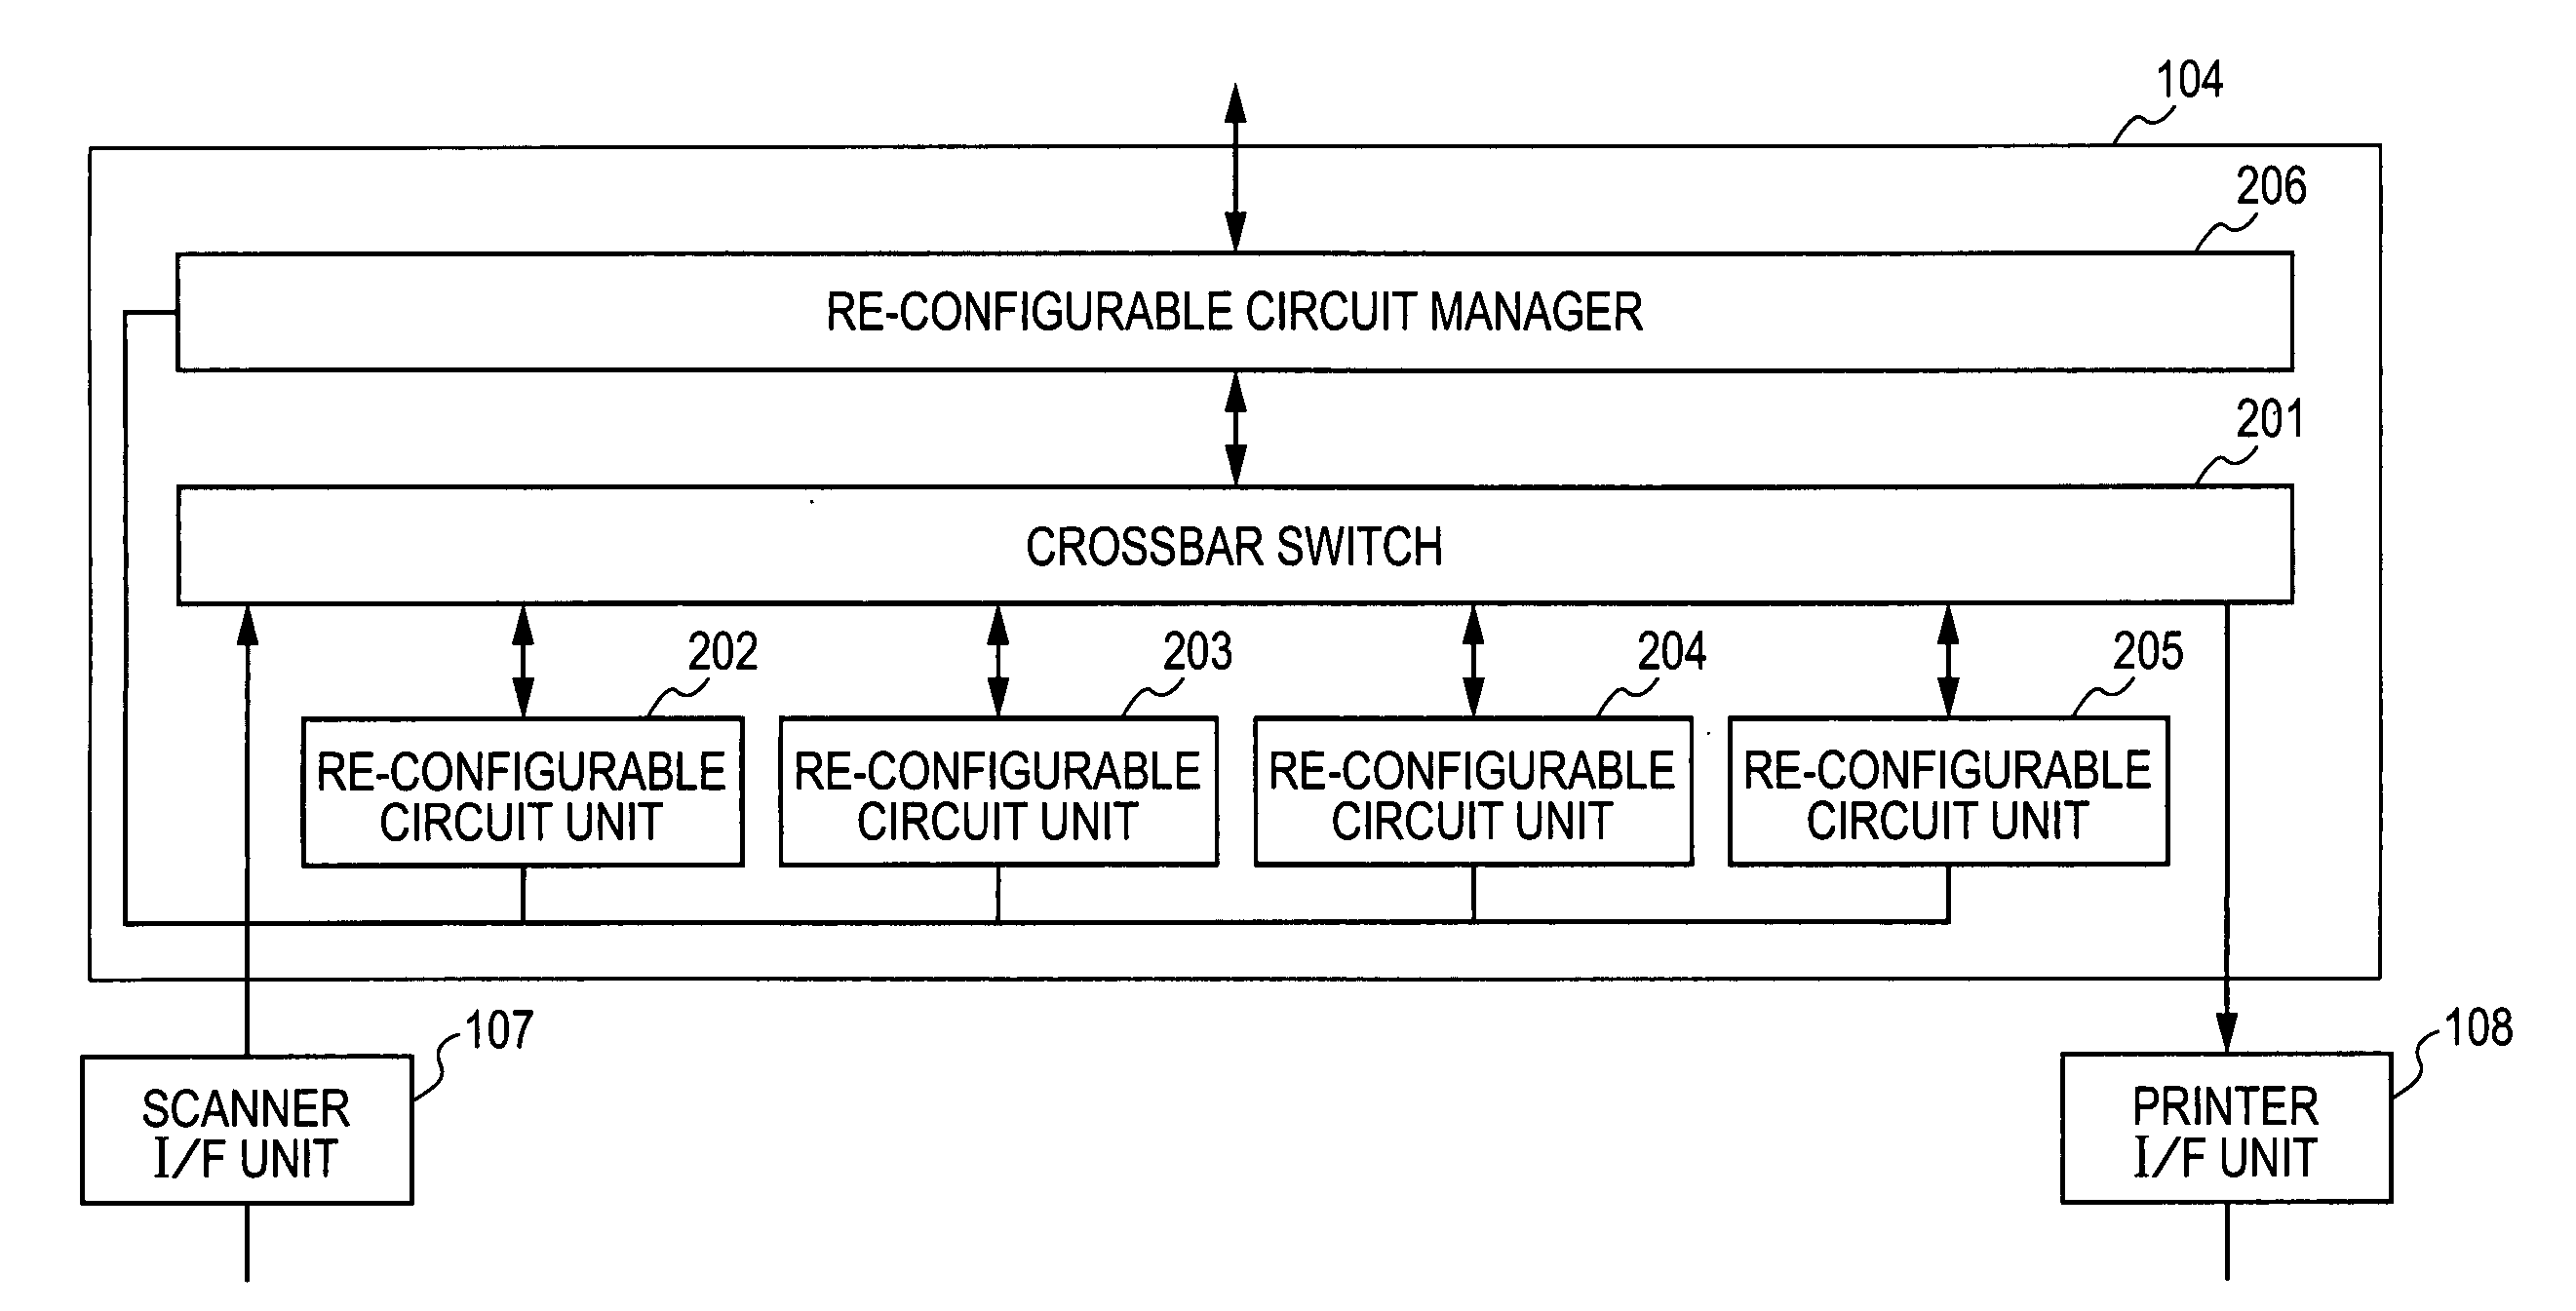 Image processing apparatus and method of controlling an image processing apparatus